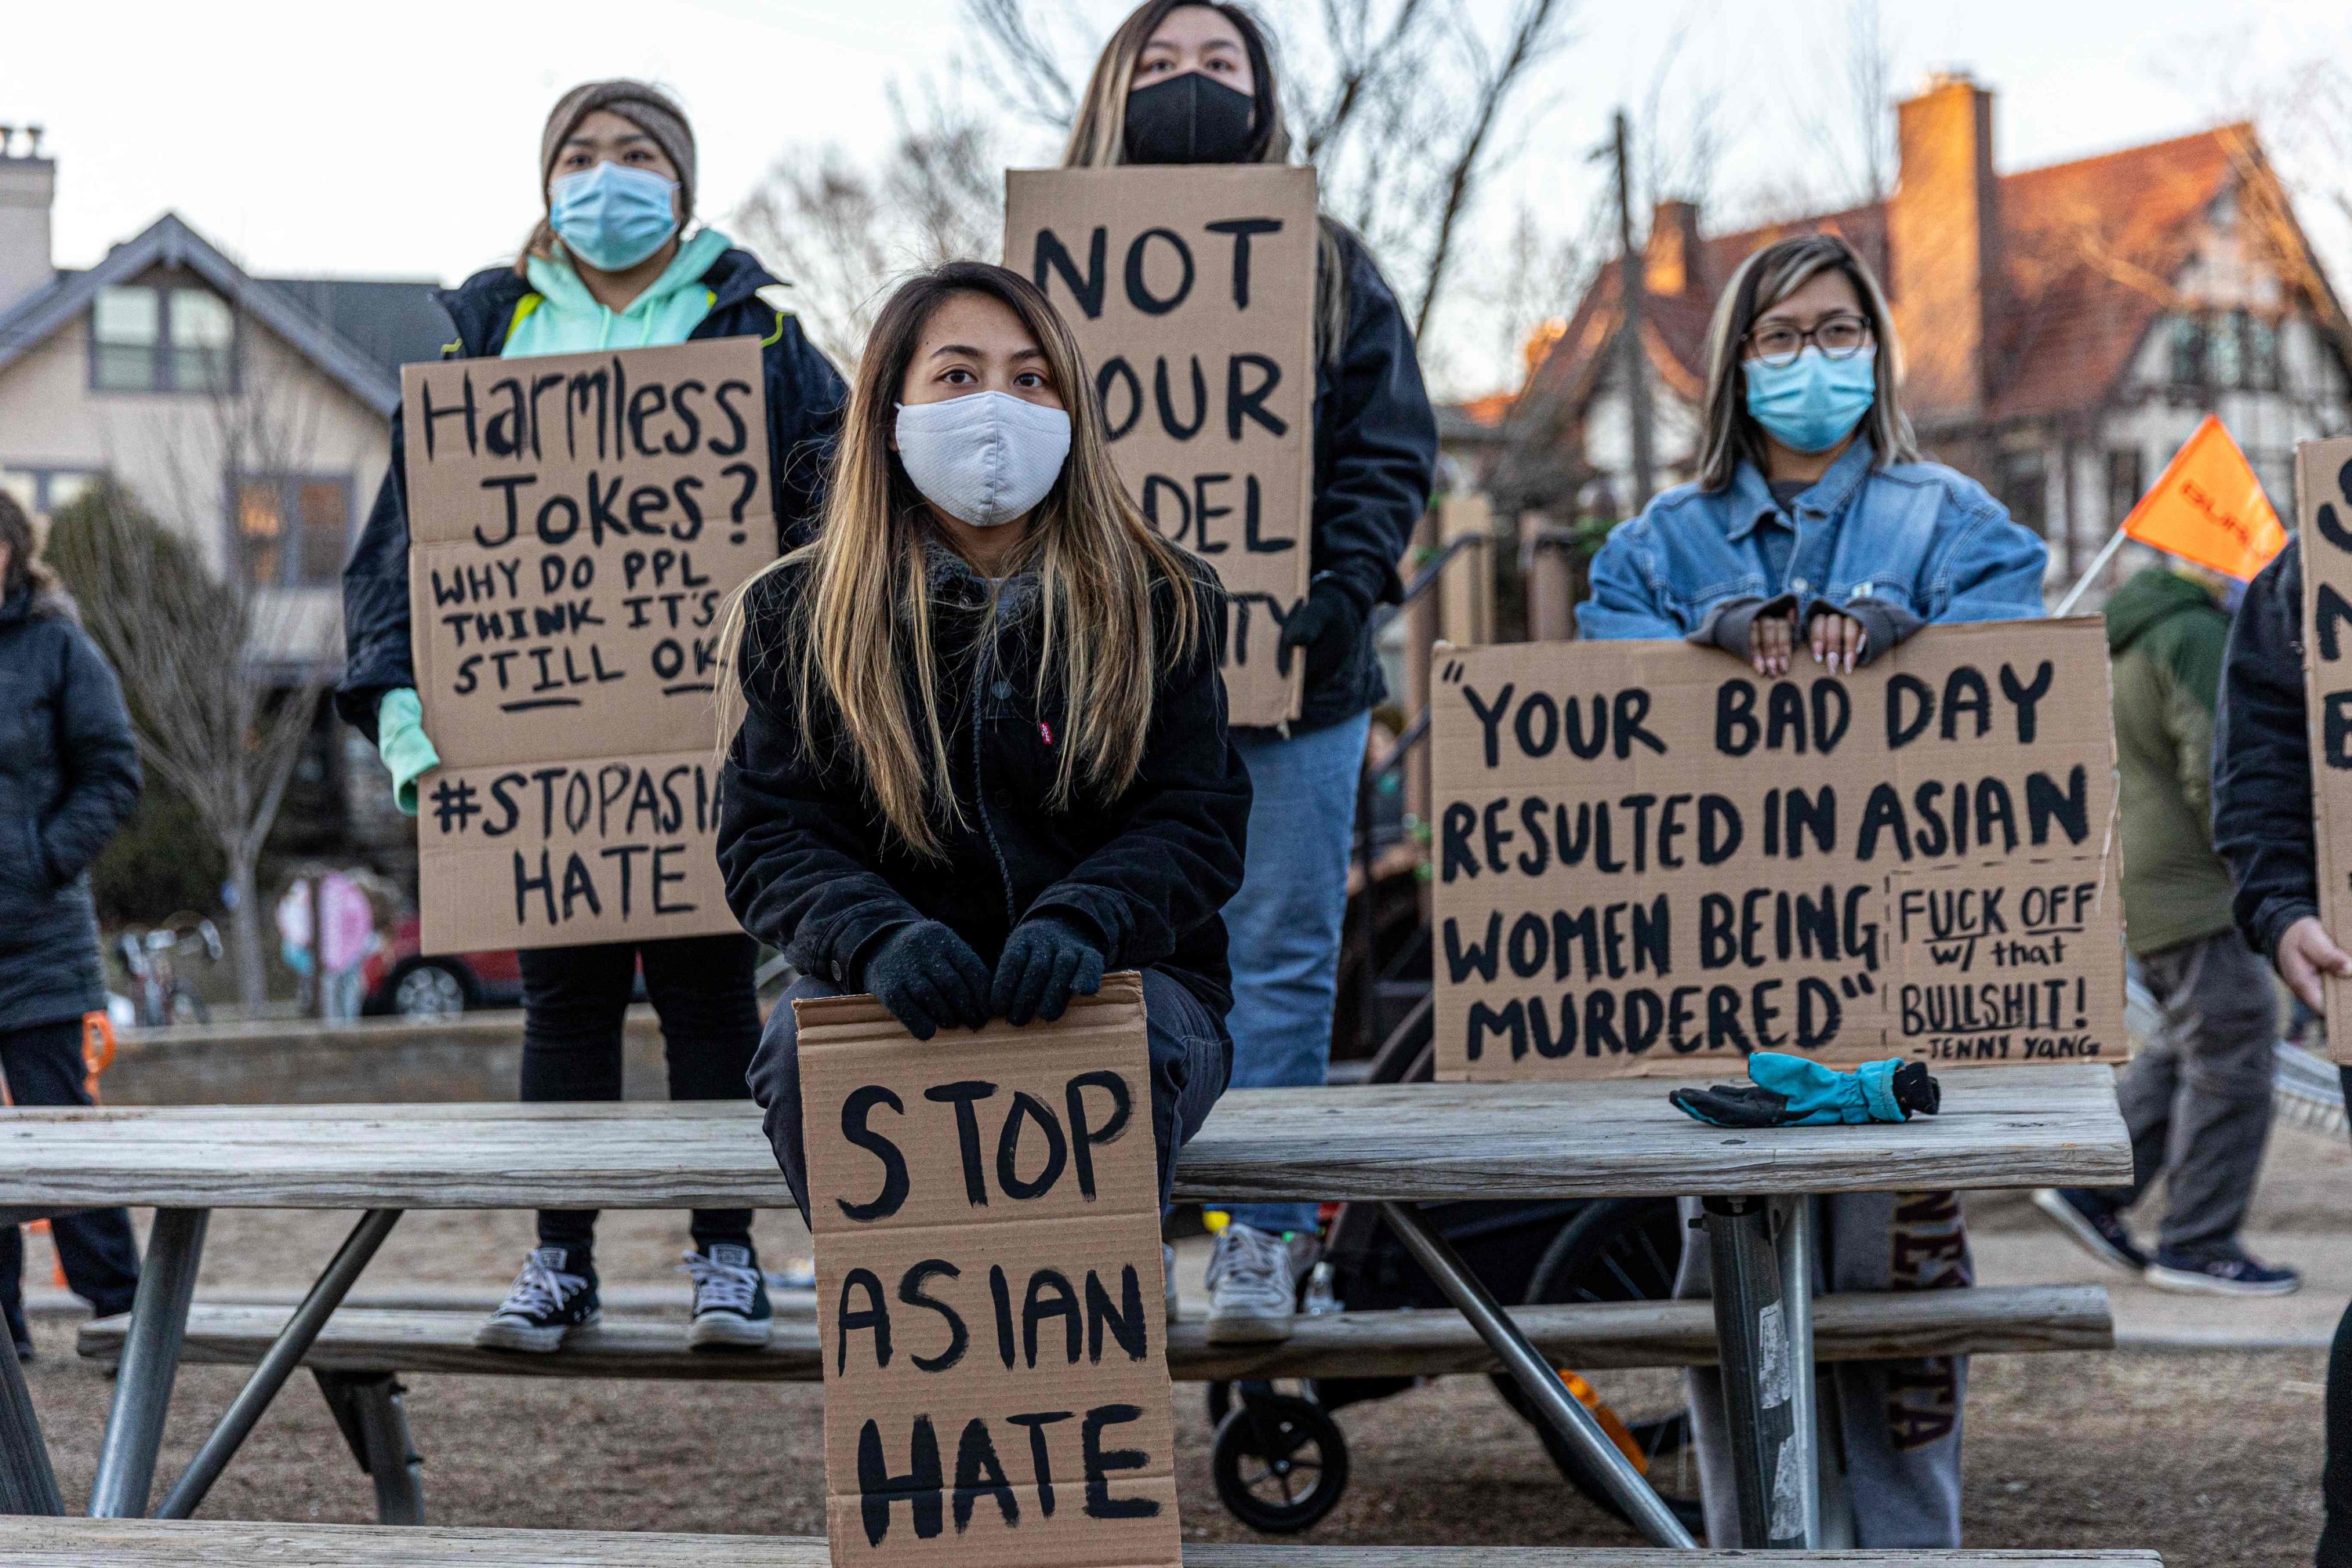 People hold signs during the Asian Solidarity March rally against anti-Asian hate in response to recent anti-Asian crime, Minneapolis, Minnesota, March 18, 2021. (AFP Photo)